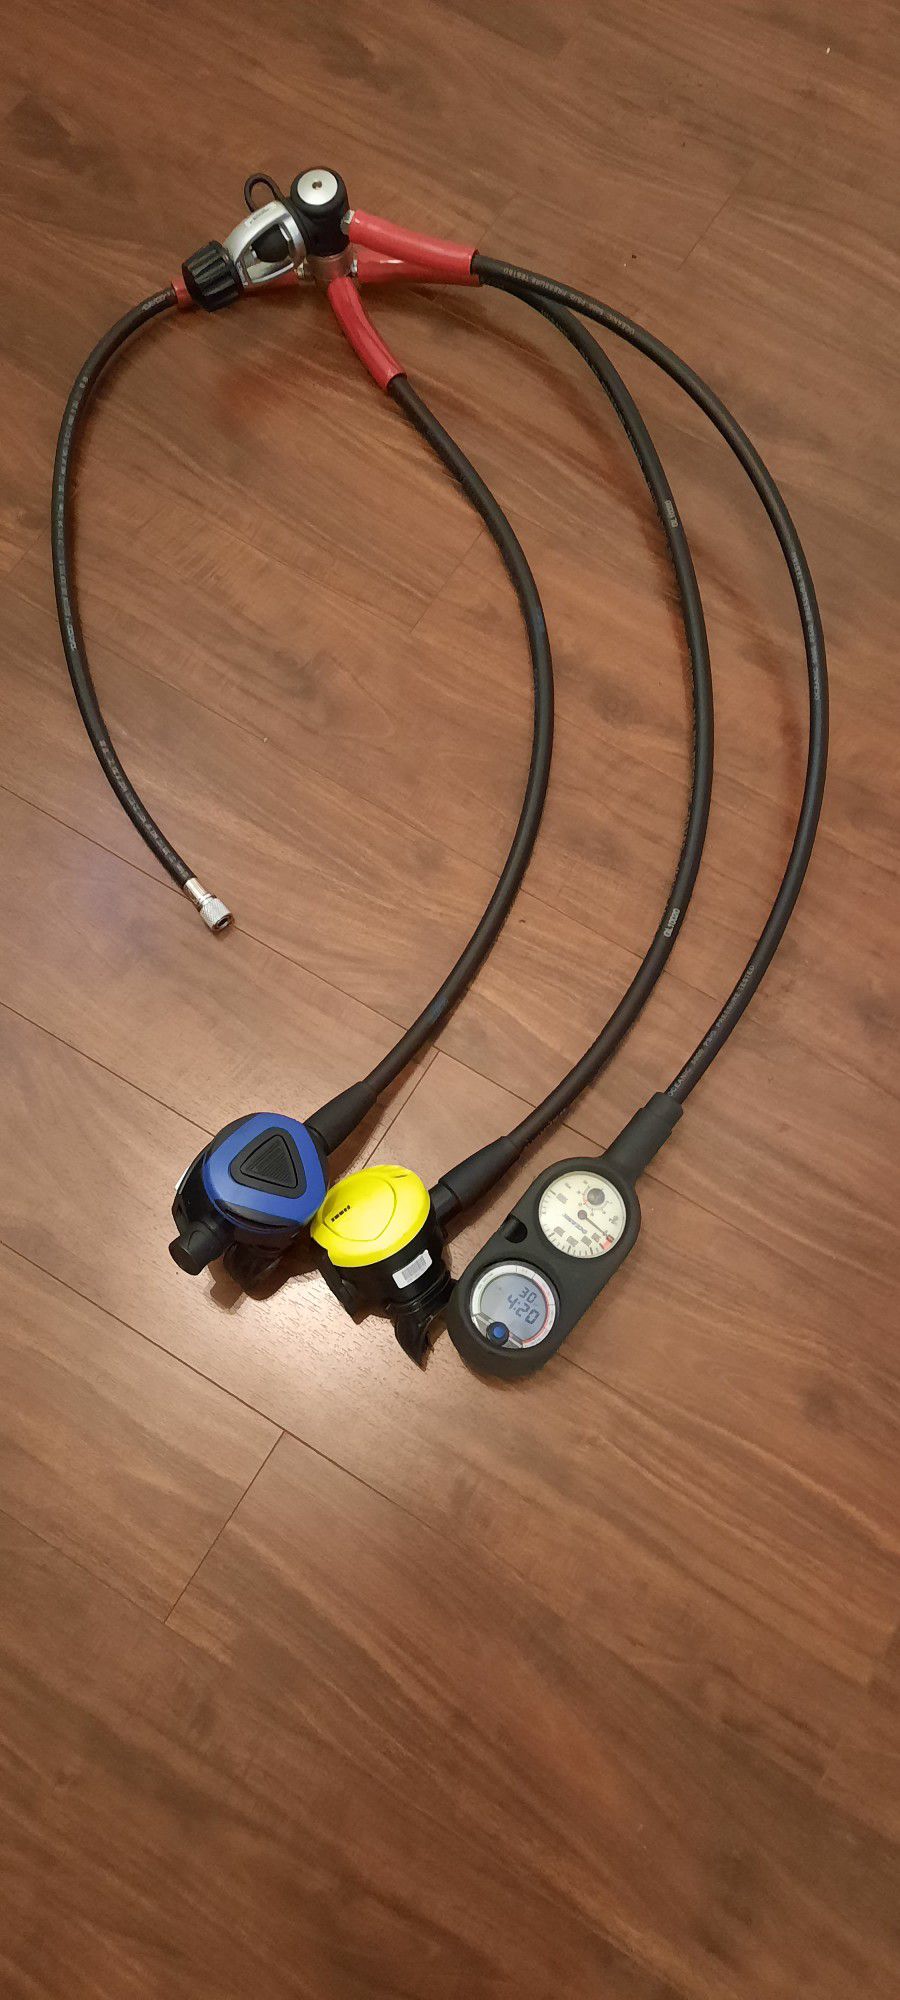 Scuba Regulator 1st Stage & 2nd stage Primary & Secondary with SPG, Compass& Dive Computer $190 OBO